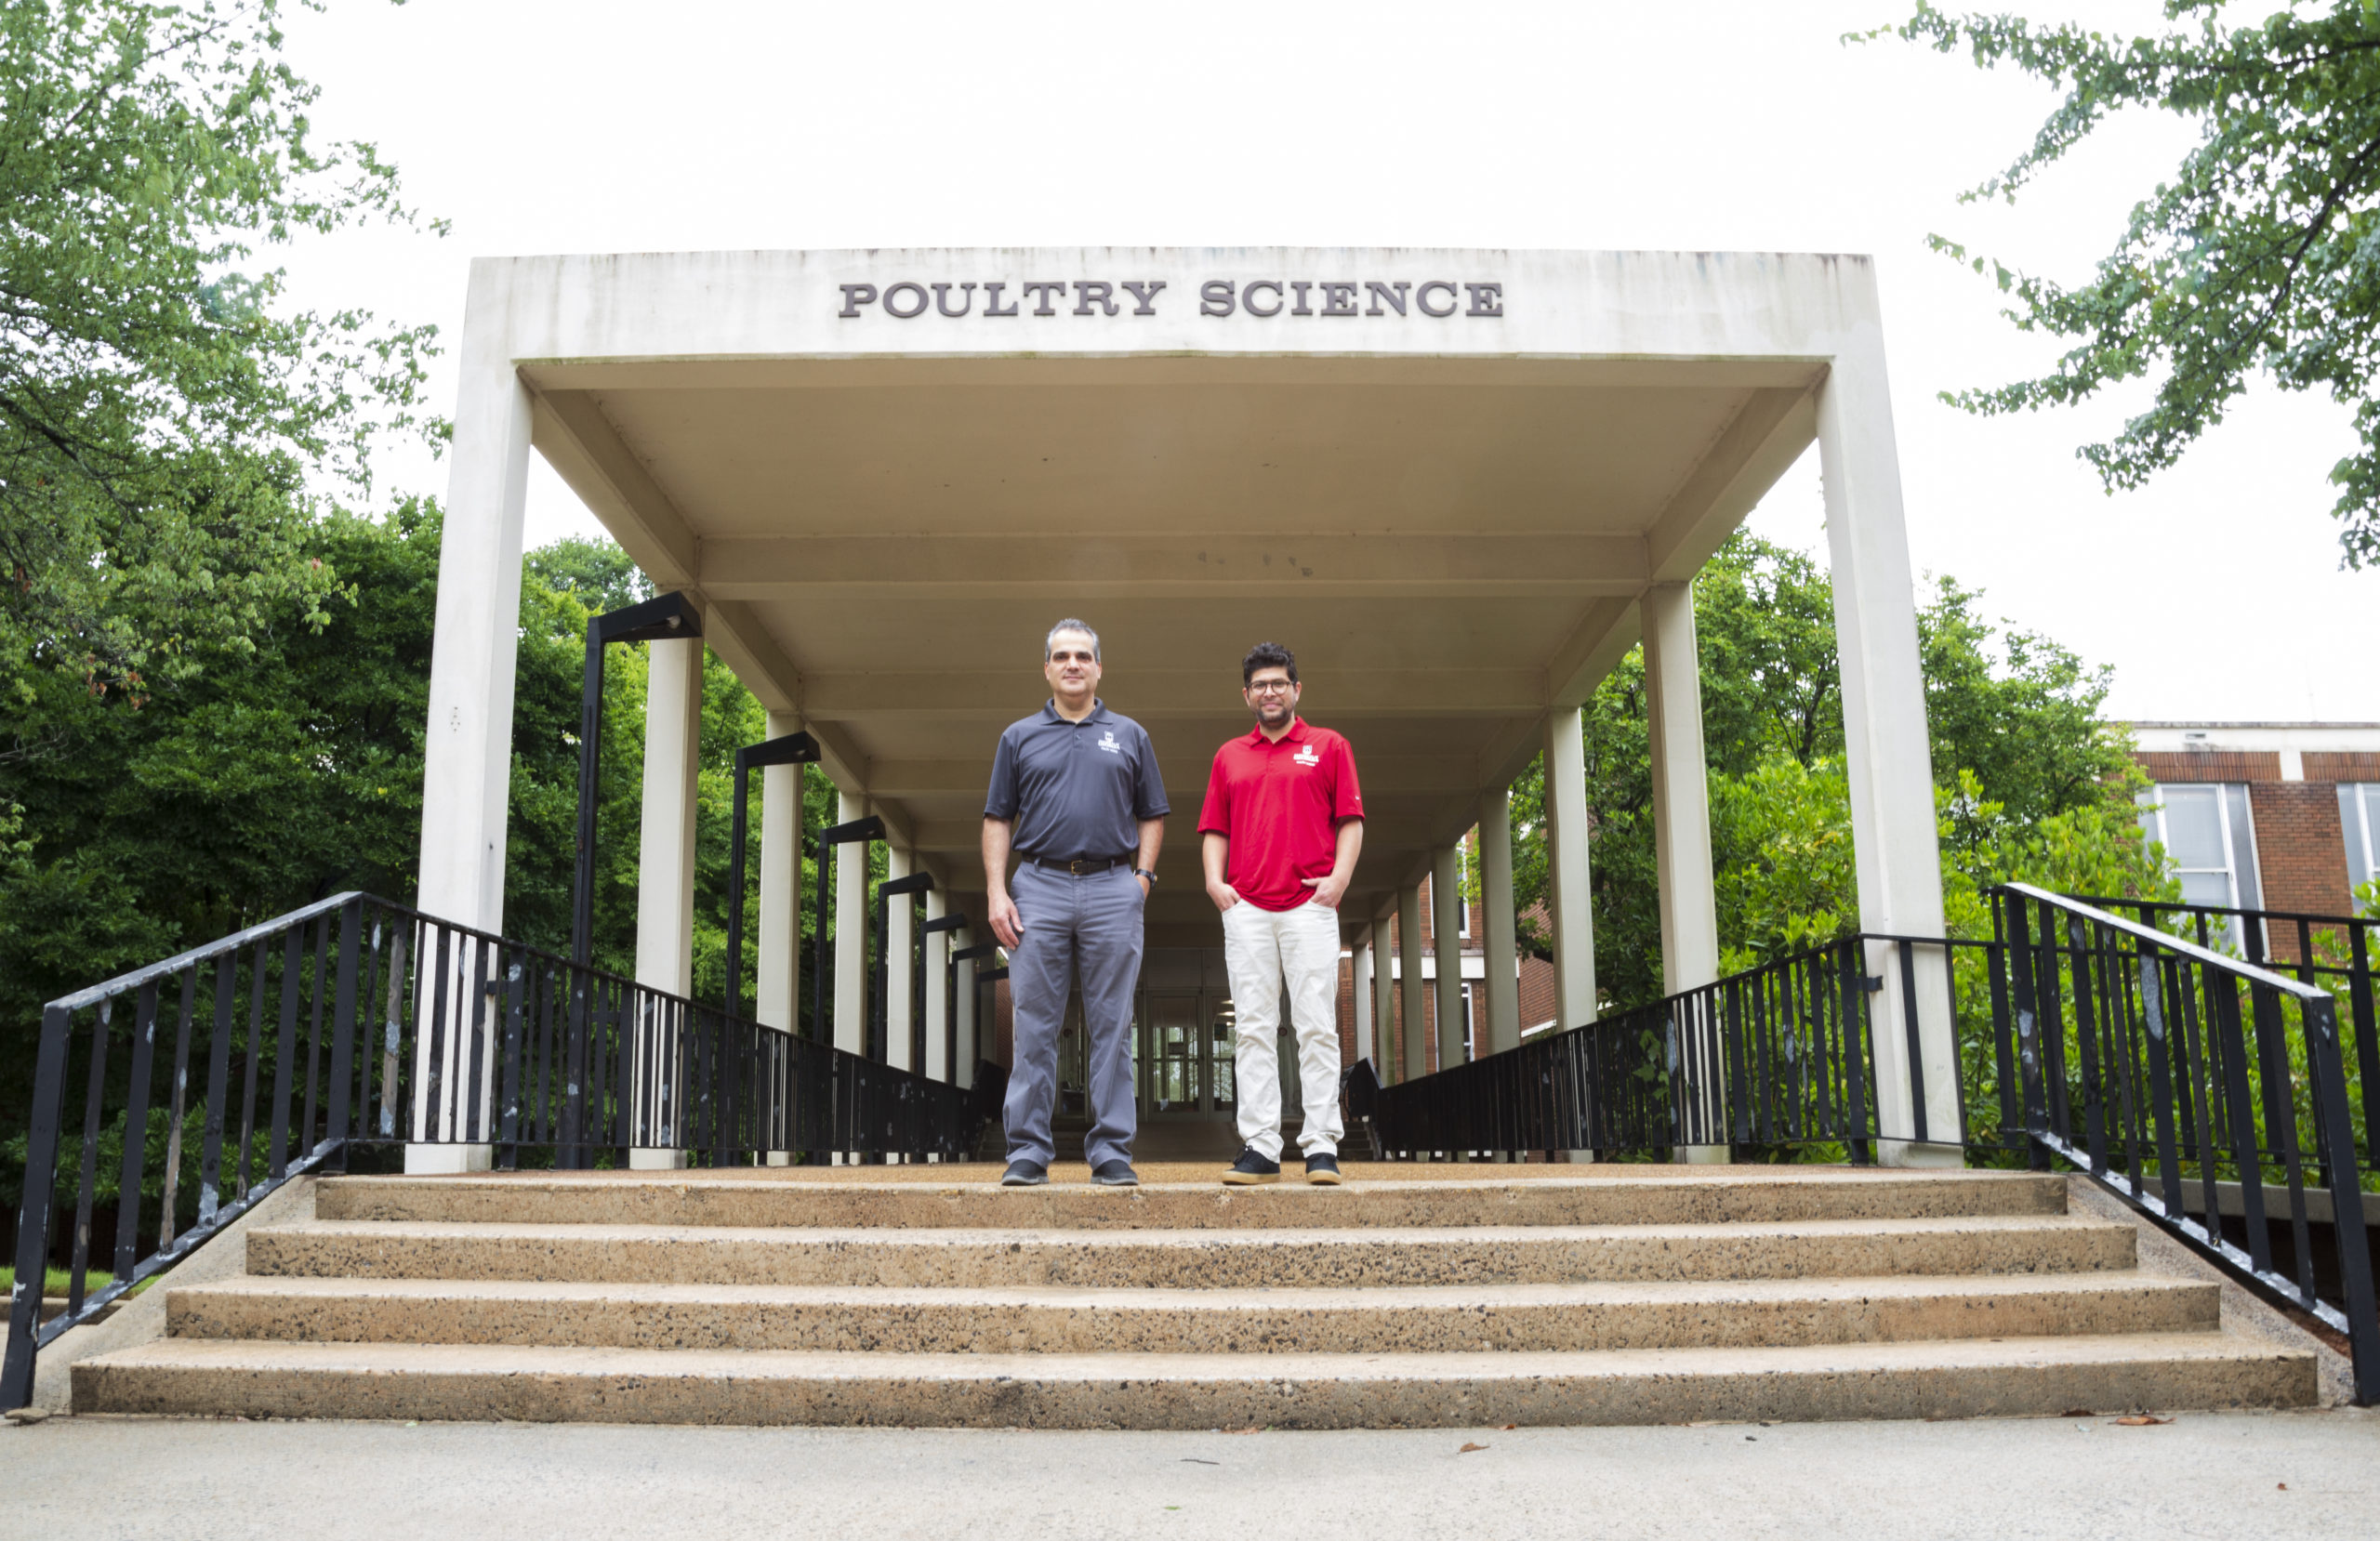 R. Harold Harrison Distinguished Professor in Poultry Science Rami Dalloul (left) and Assistant Professor Prafulla Regmi (right) recently joined the University of Georgia Department of Poultry Science.